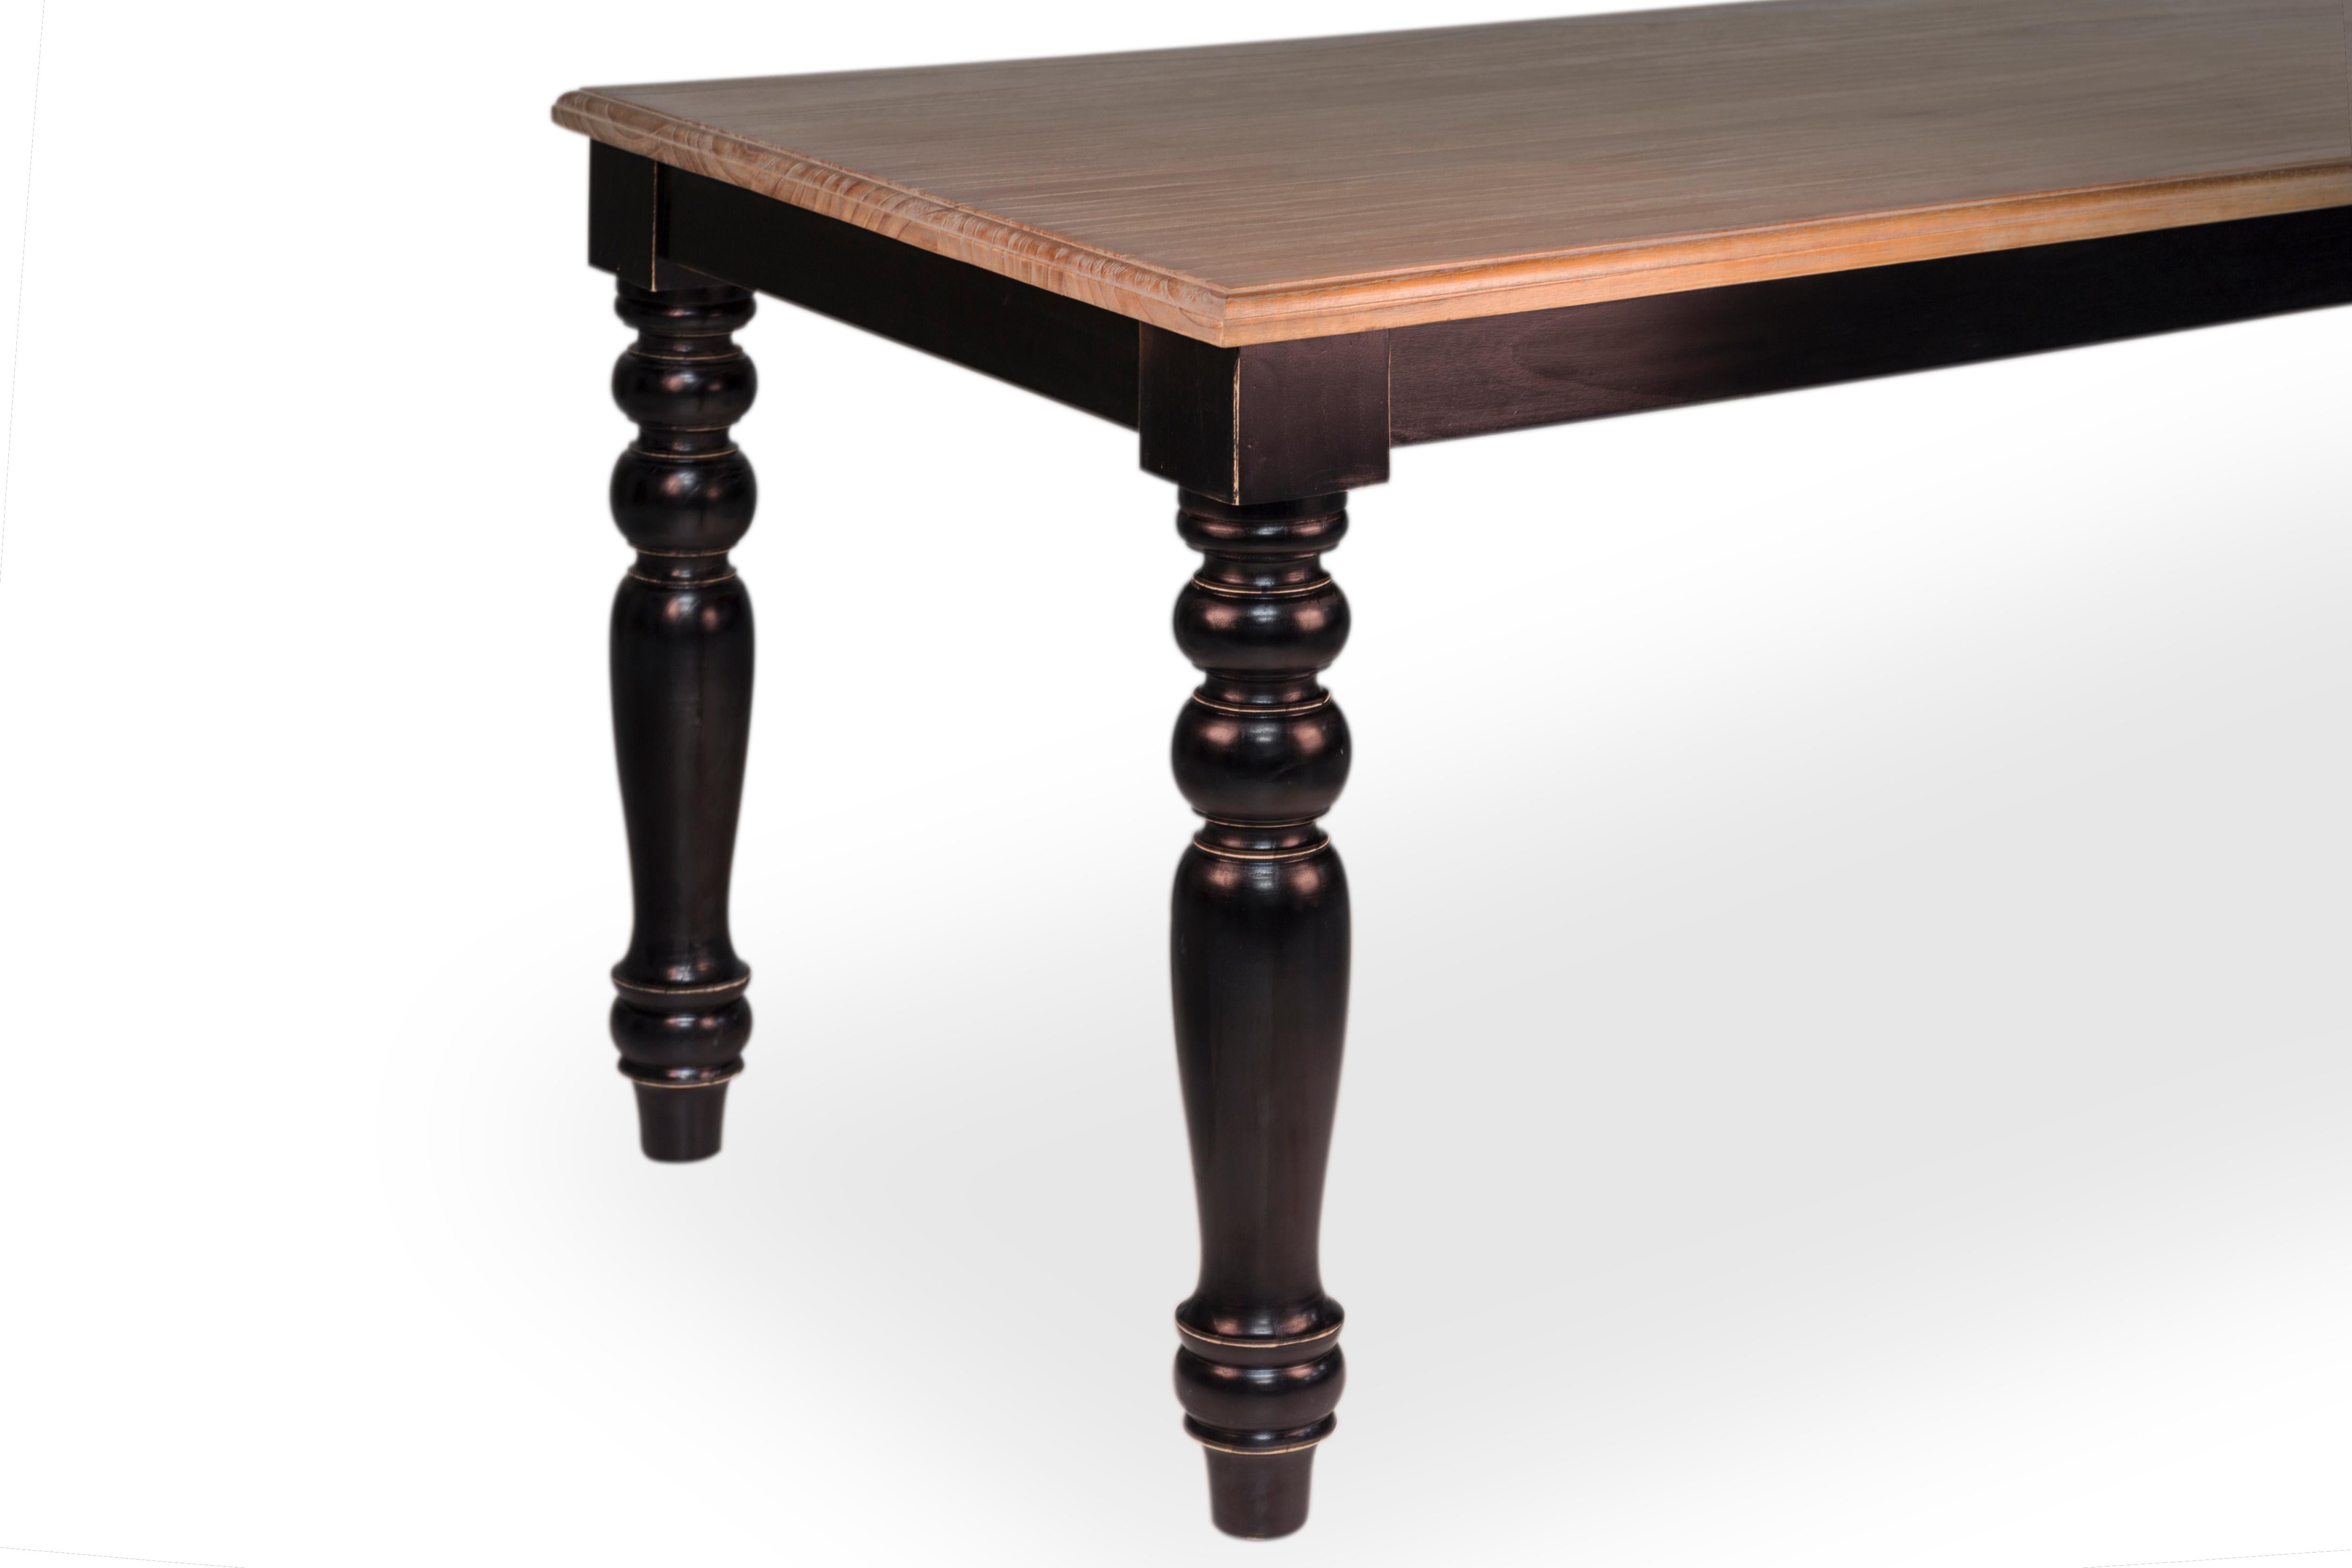 French Provincial style dining room table with black ebonized legs

Handmade with solid wood.

 